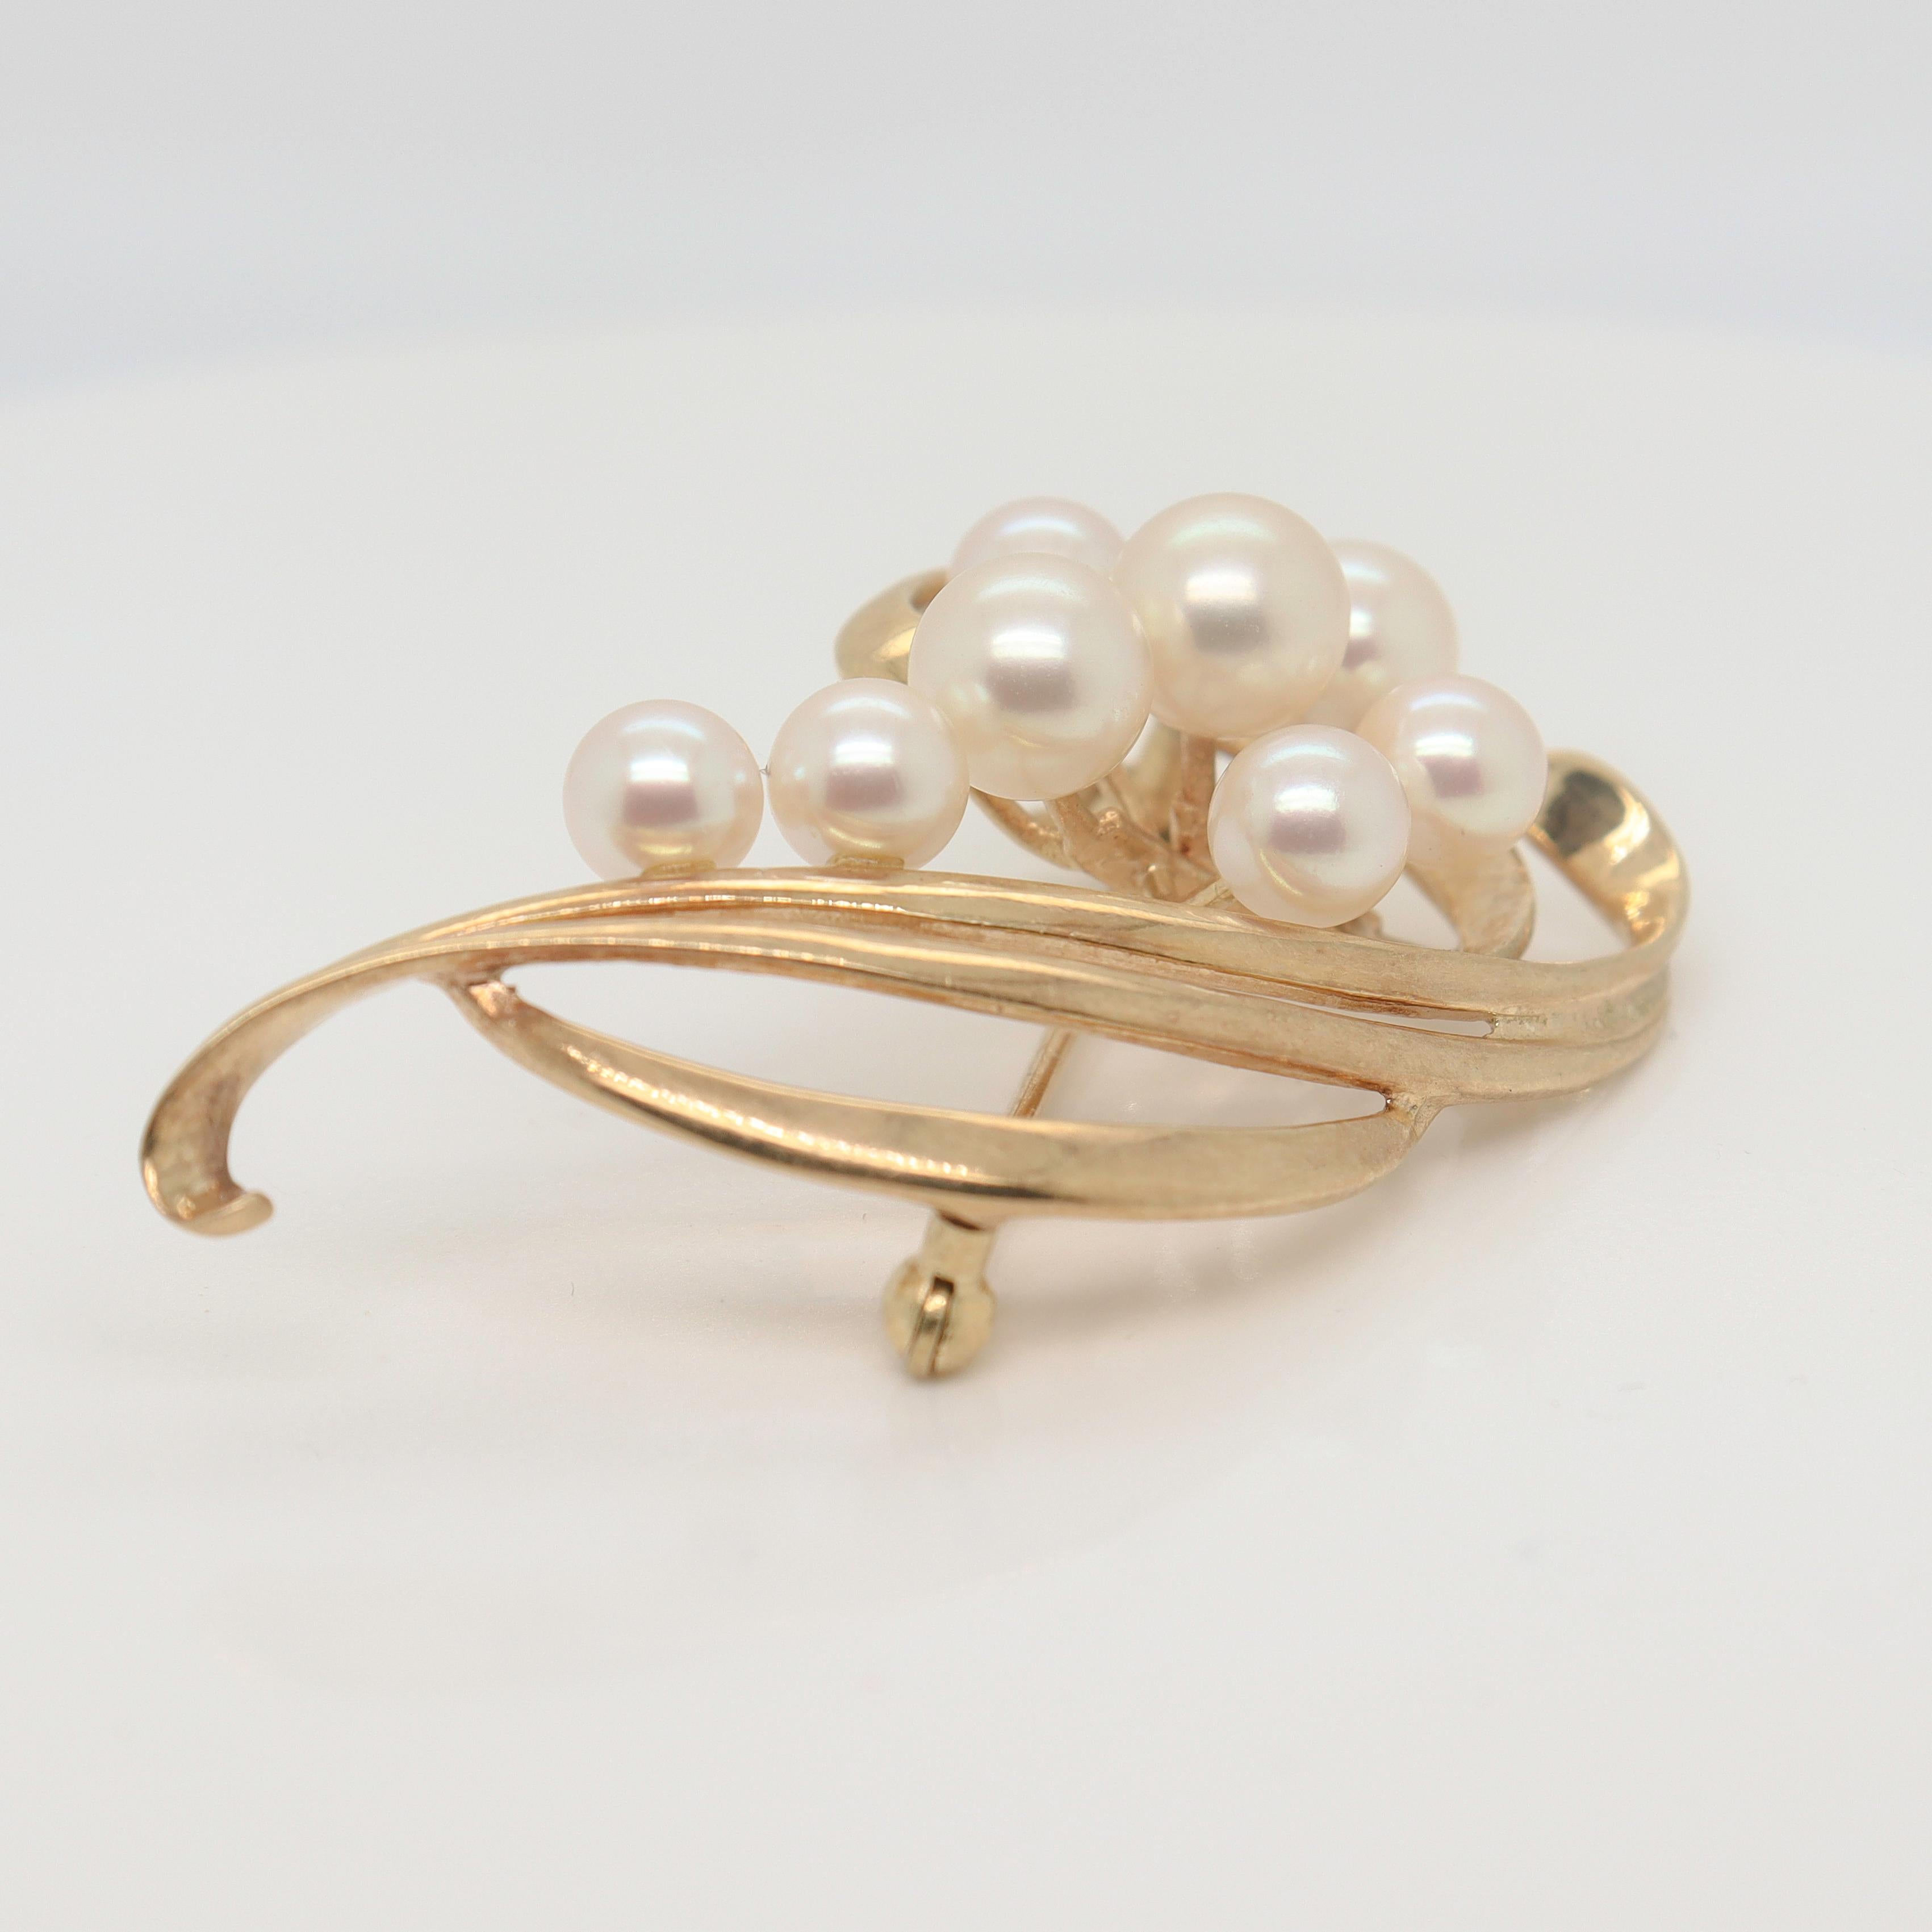 Mikimoto Modernist 14k Gold & Akoya Pearl Brooch or Pin For Sale 3